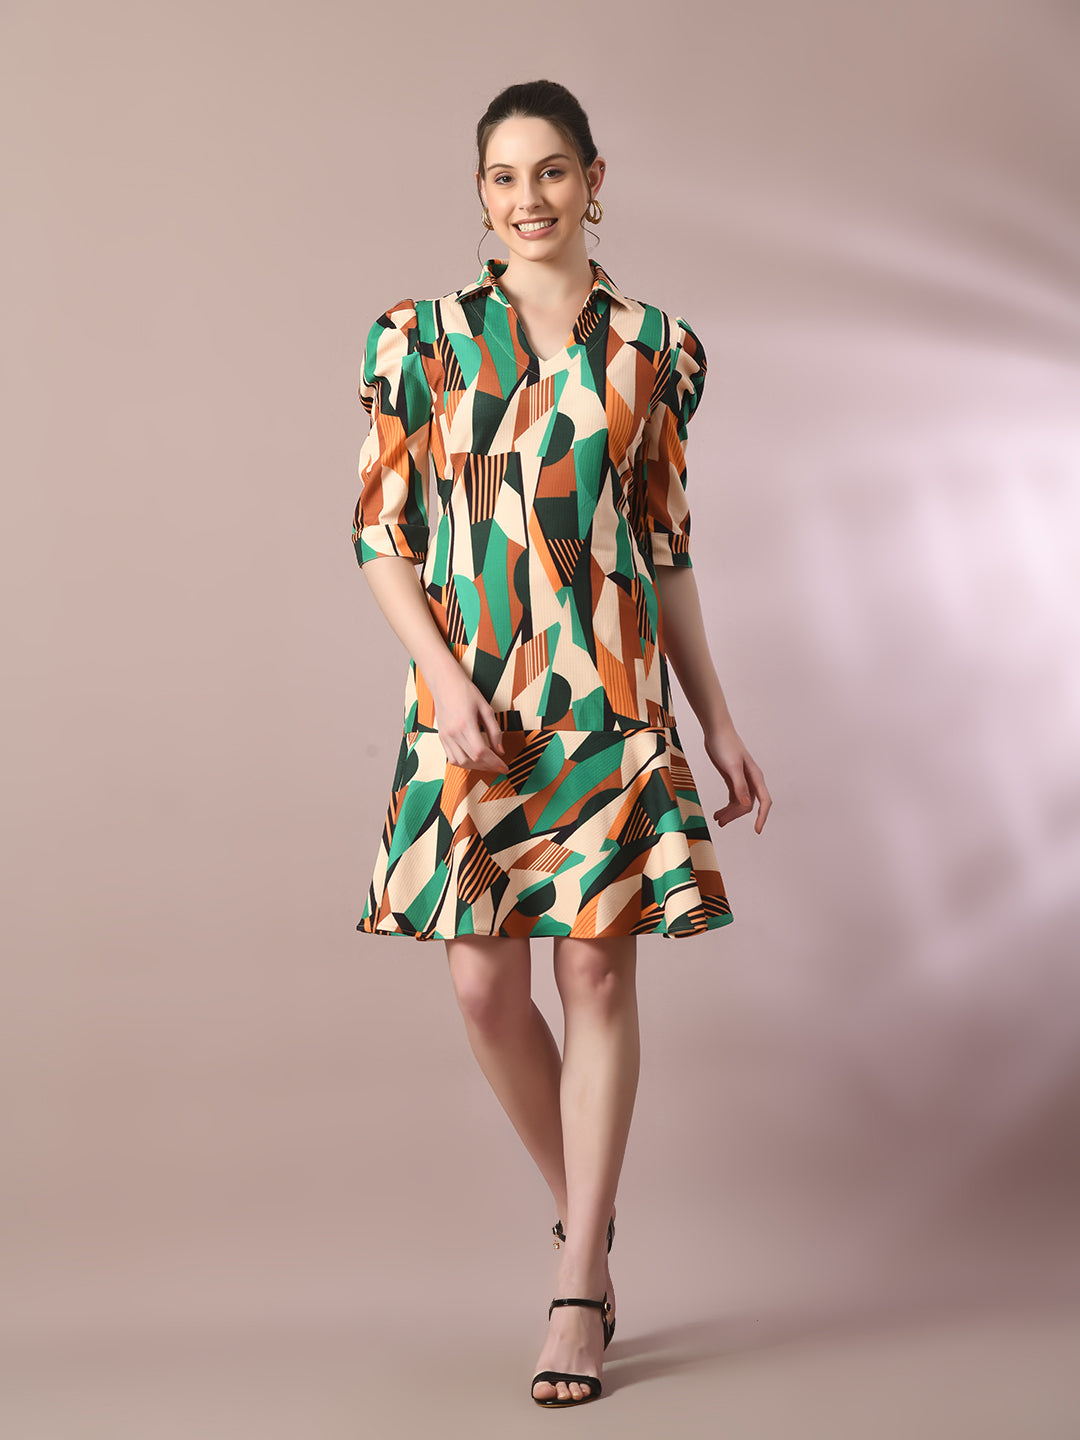 Women's  Multi Printed Shirt Collar Fit And Flare Party Dress  - Myshka